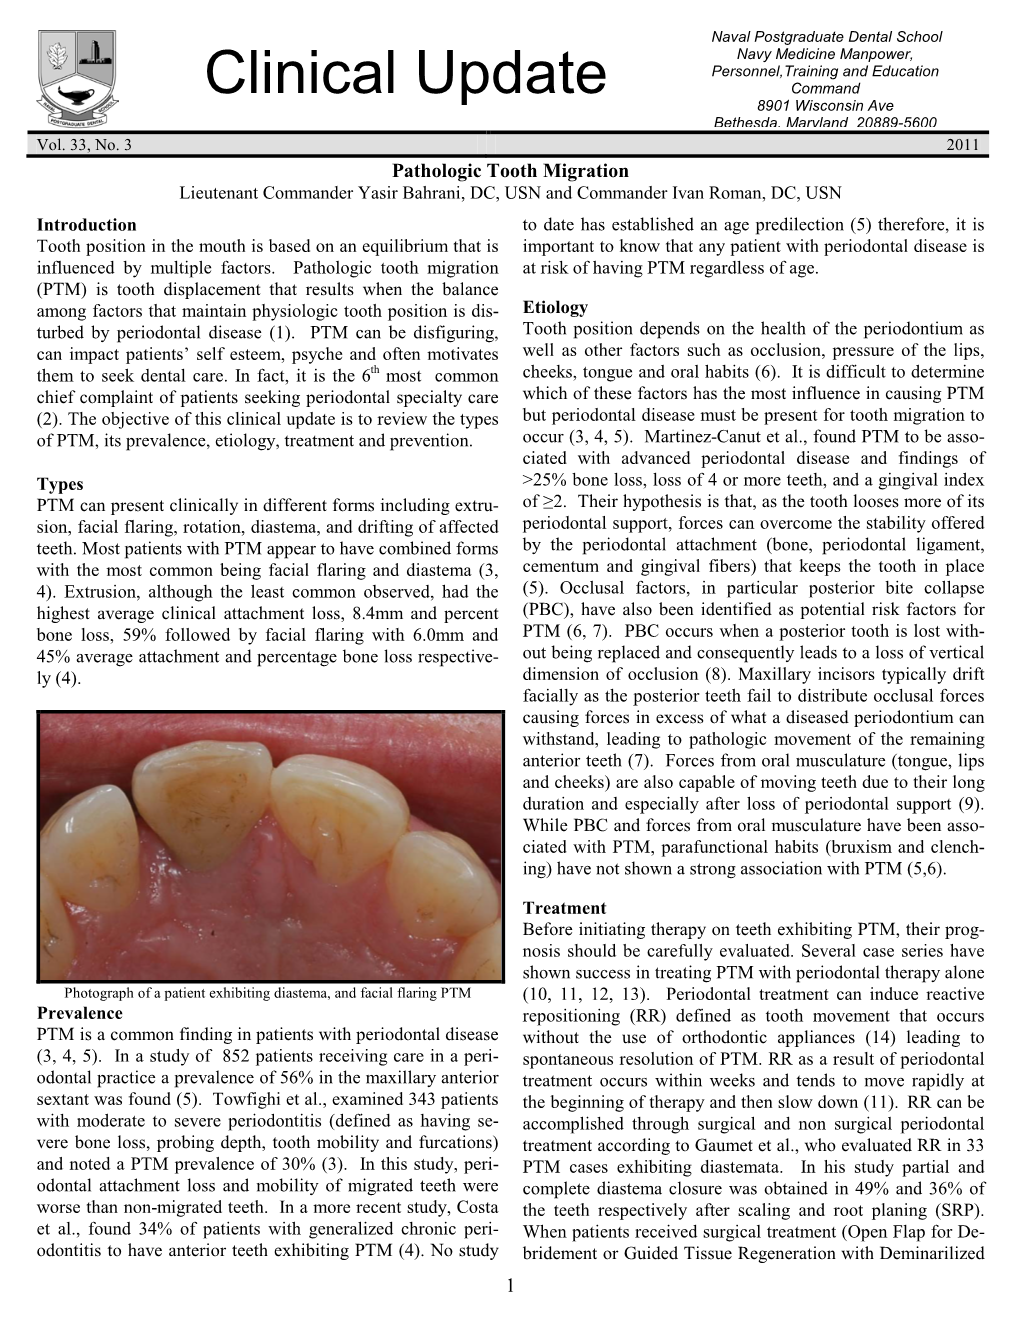 Gingival Overgrowth